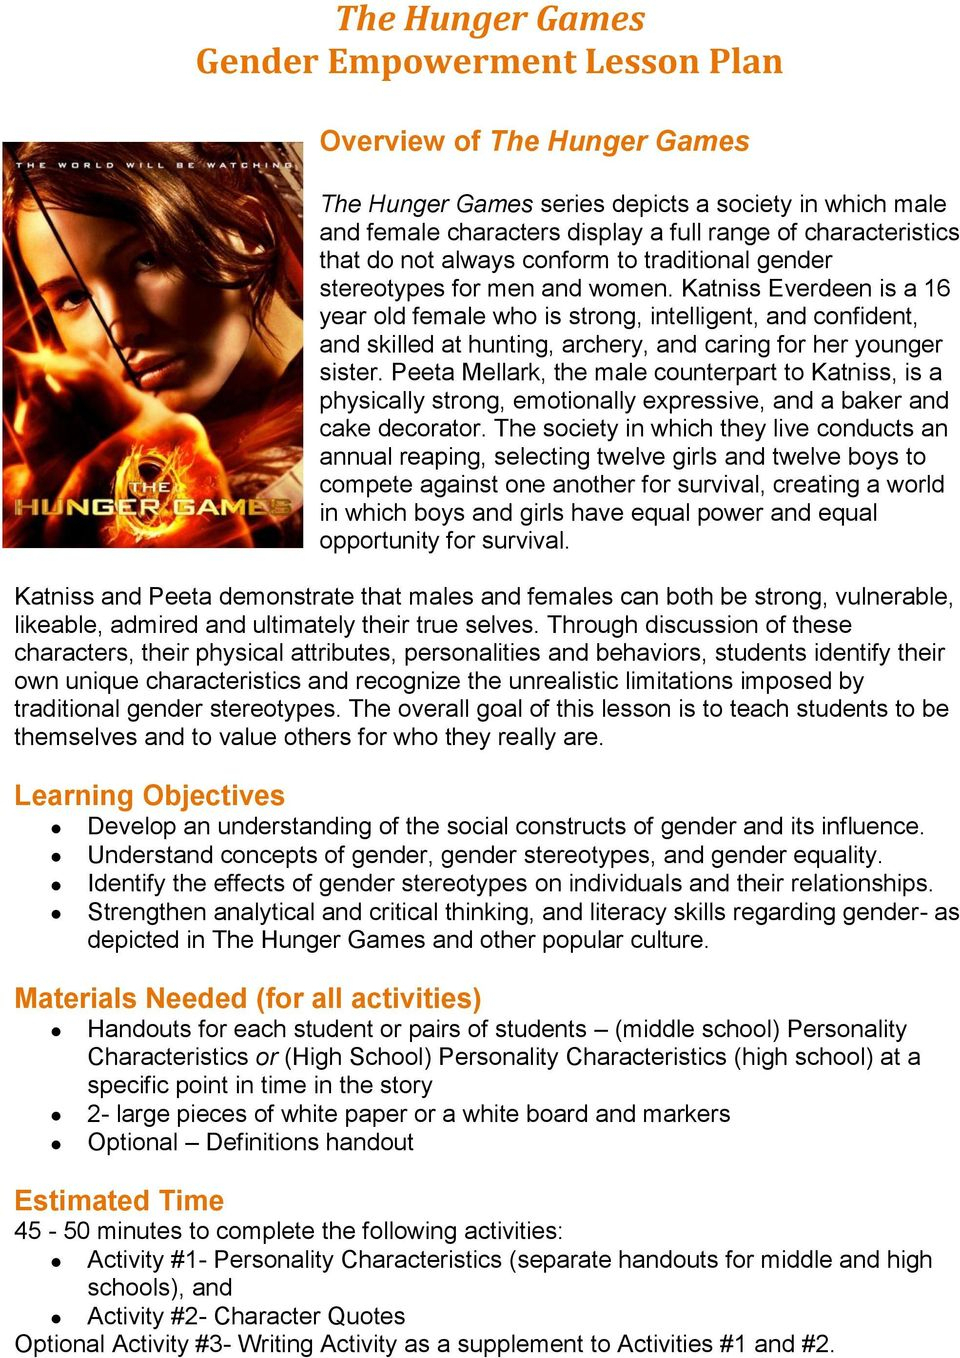 The Hunger Games Gender Empowerment Lesson Plan - Pdf Free